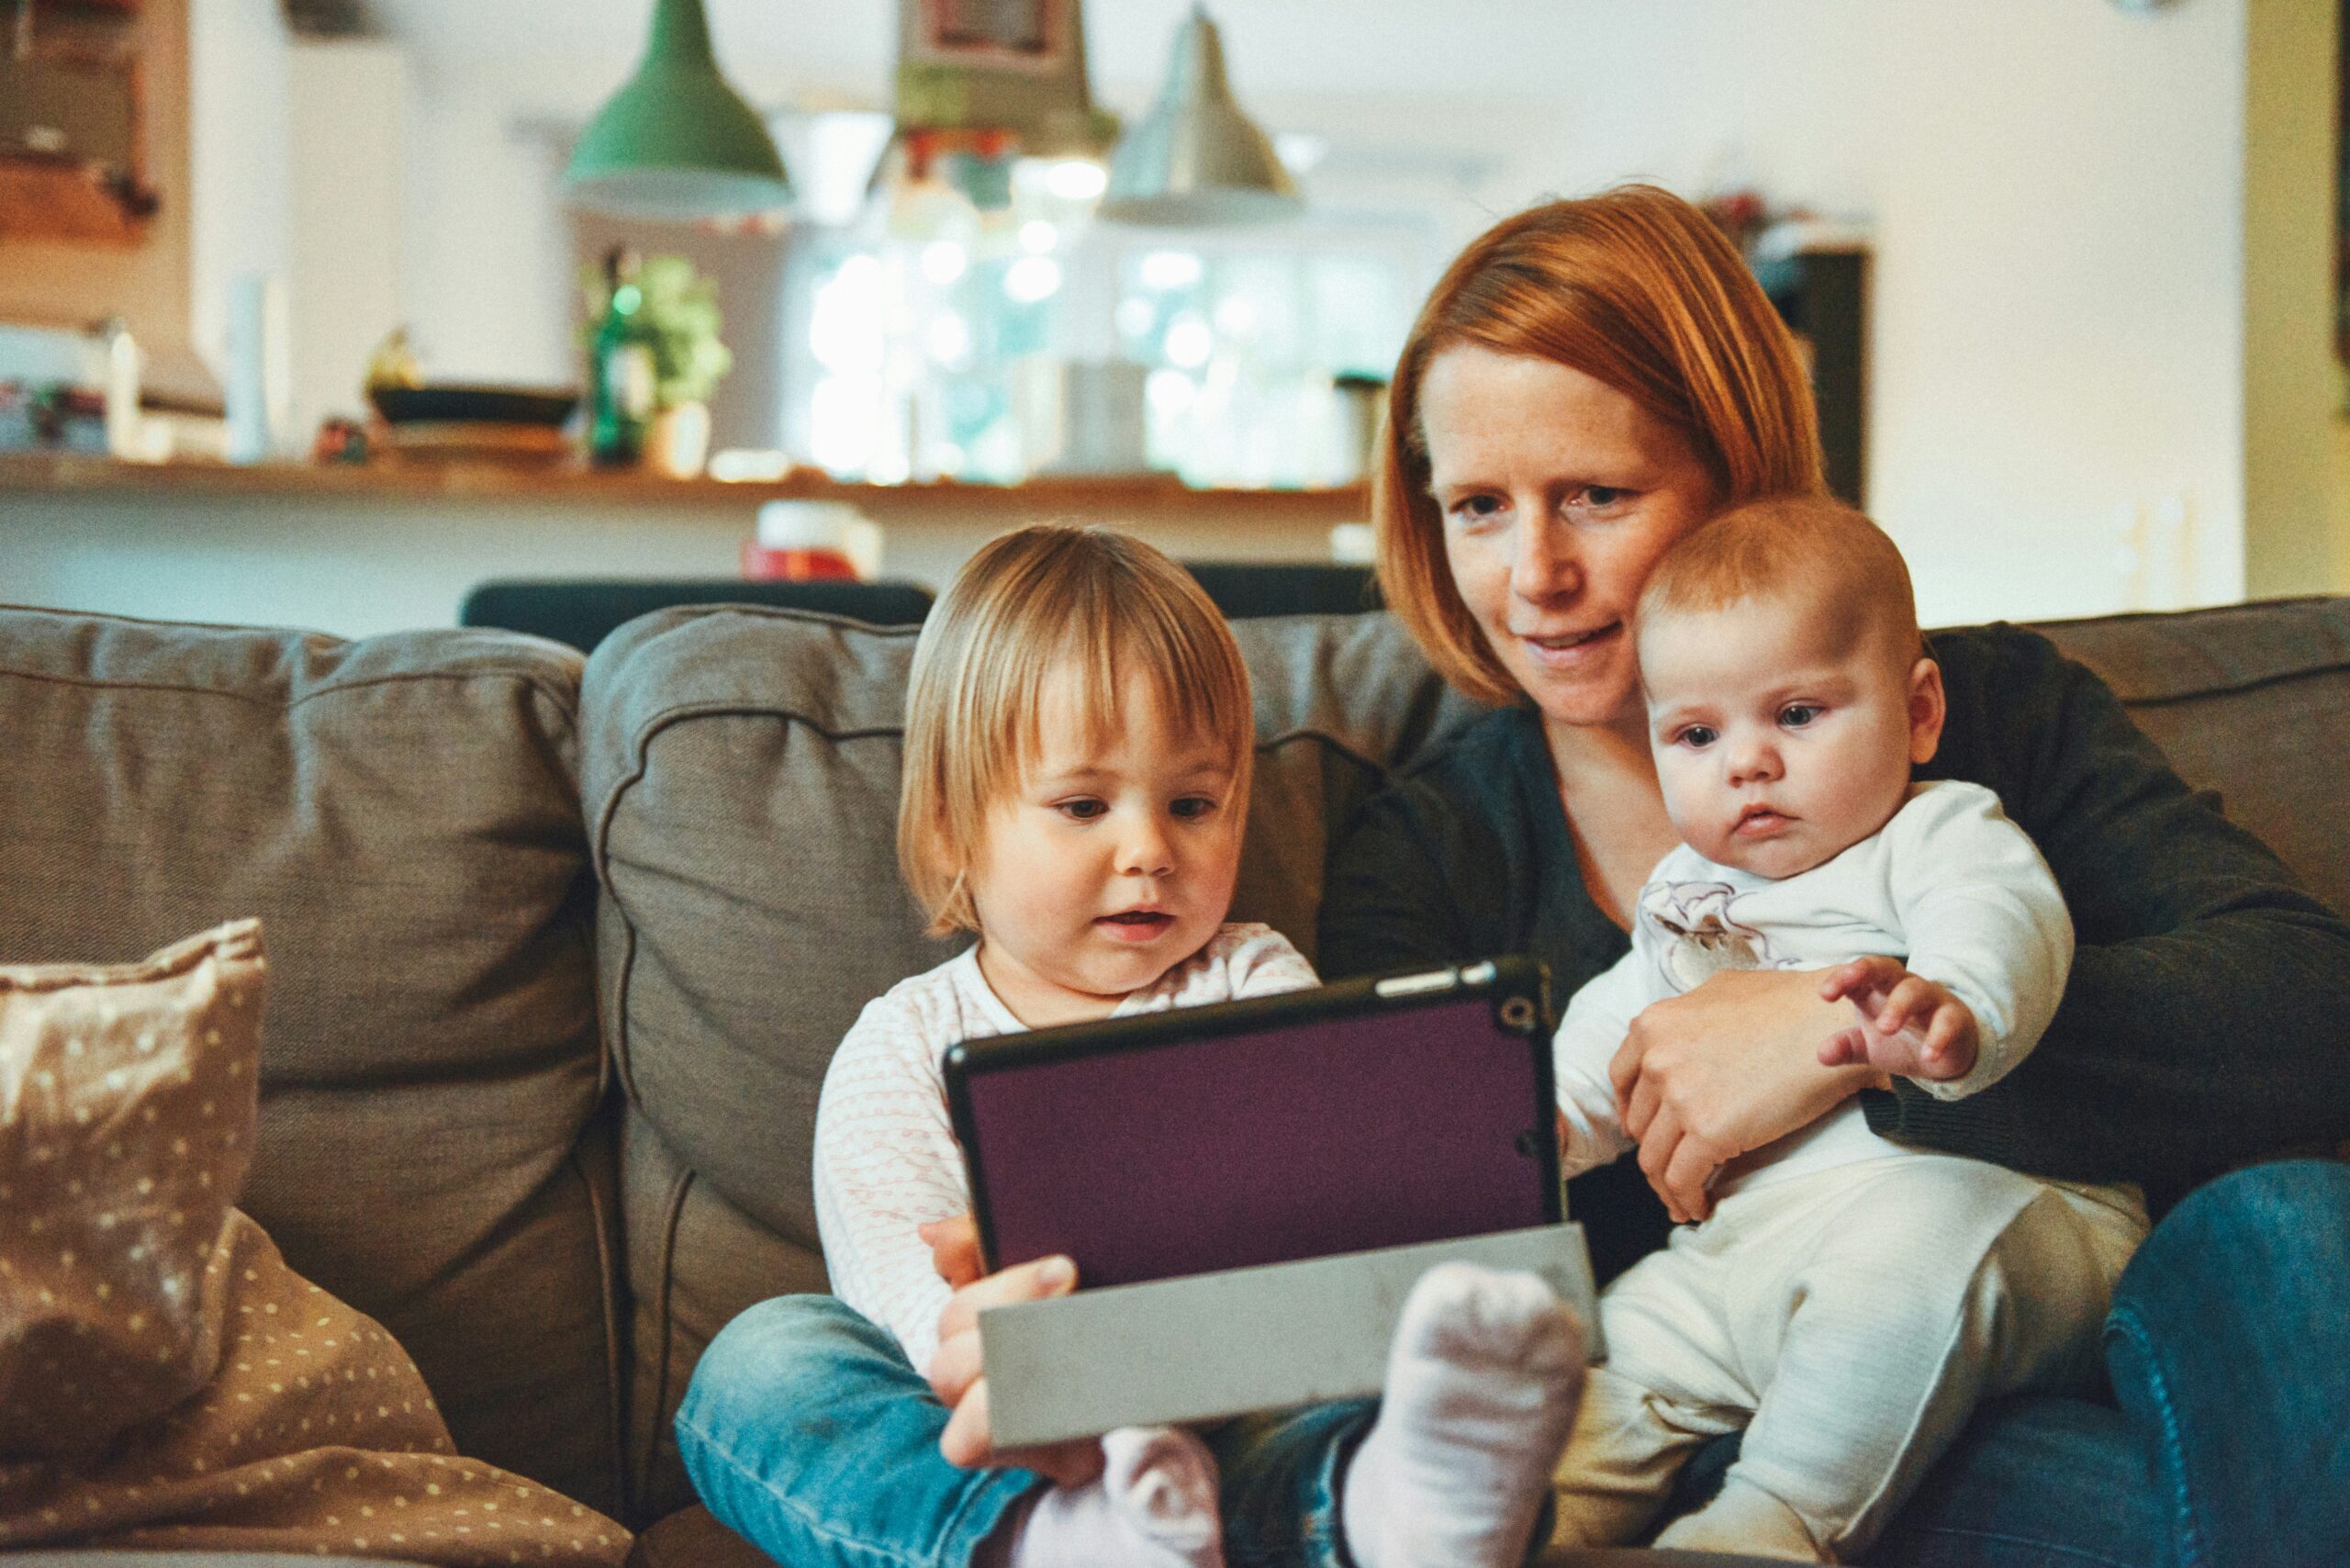 A Brooklyn mother sitting on a couch with her toddler and new baby playing on an ipad. Maternal self esteem is an essential part of maternal mental health.